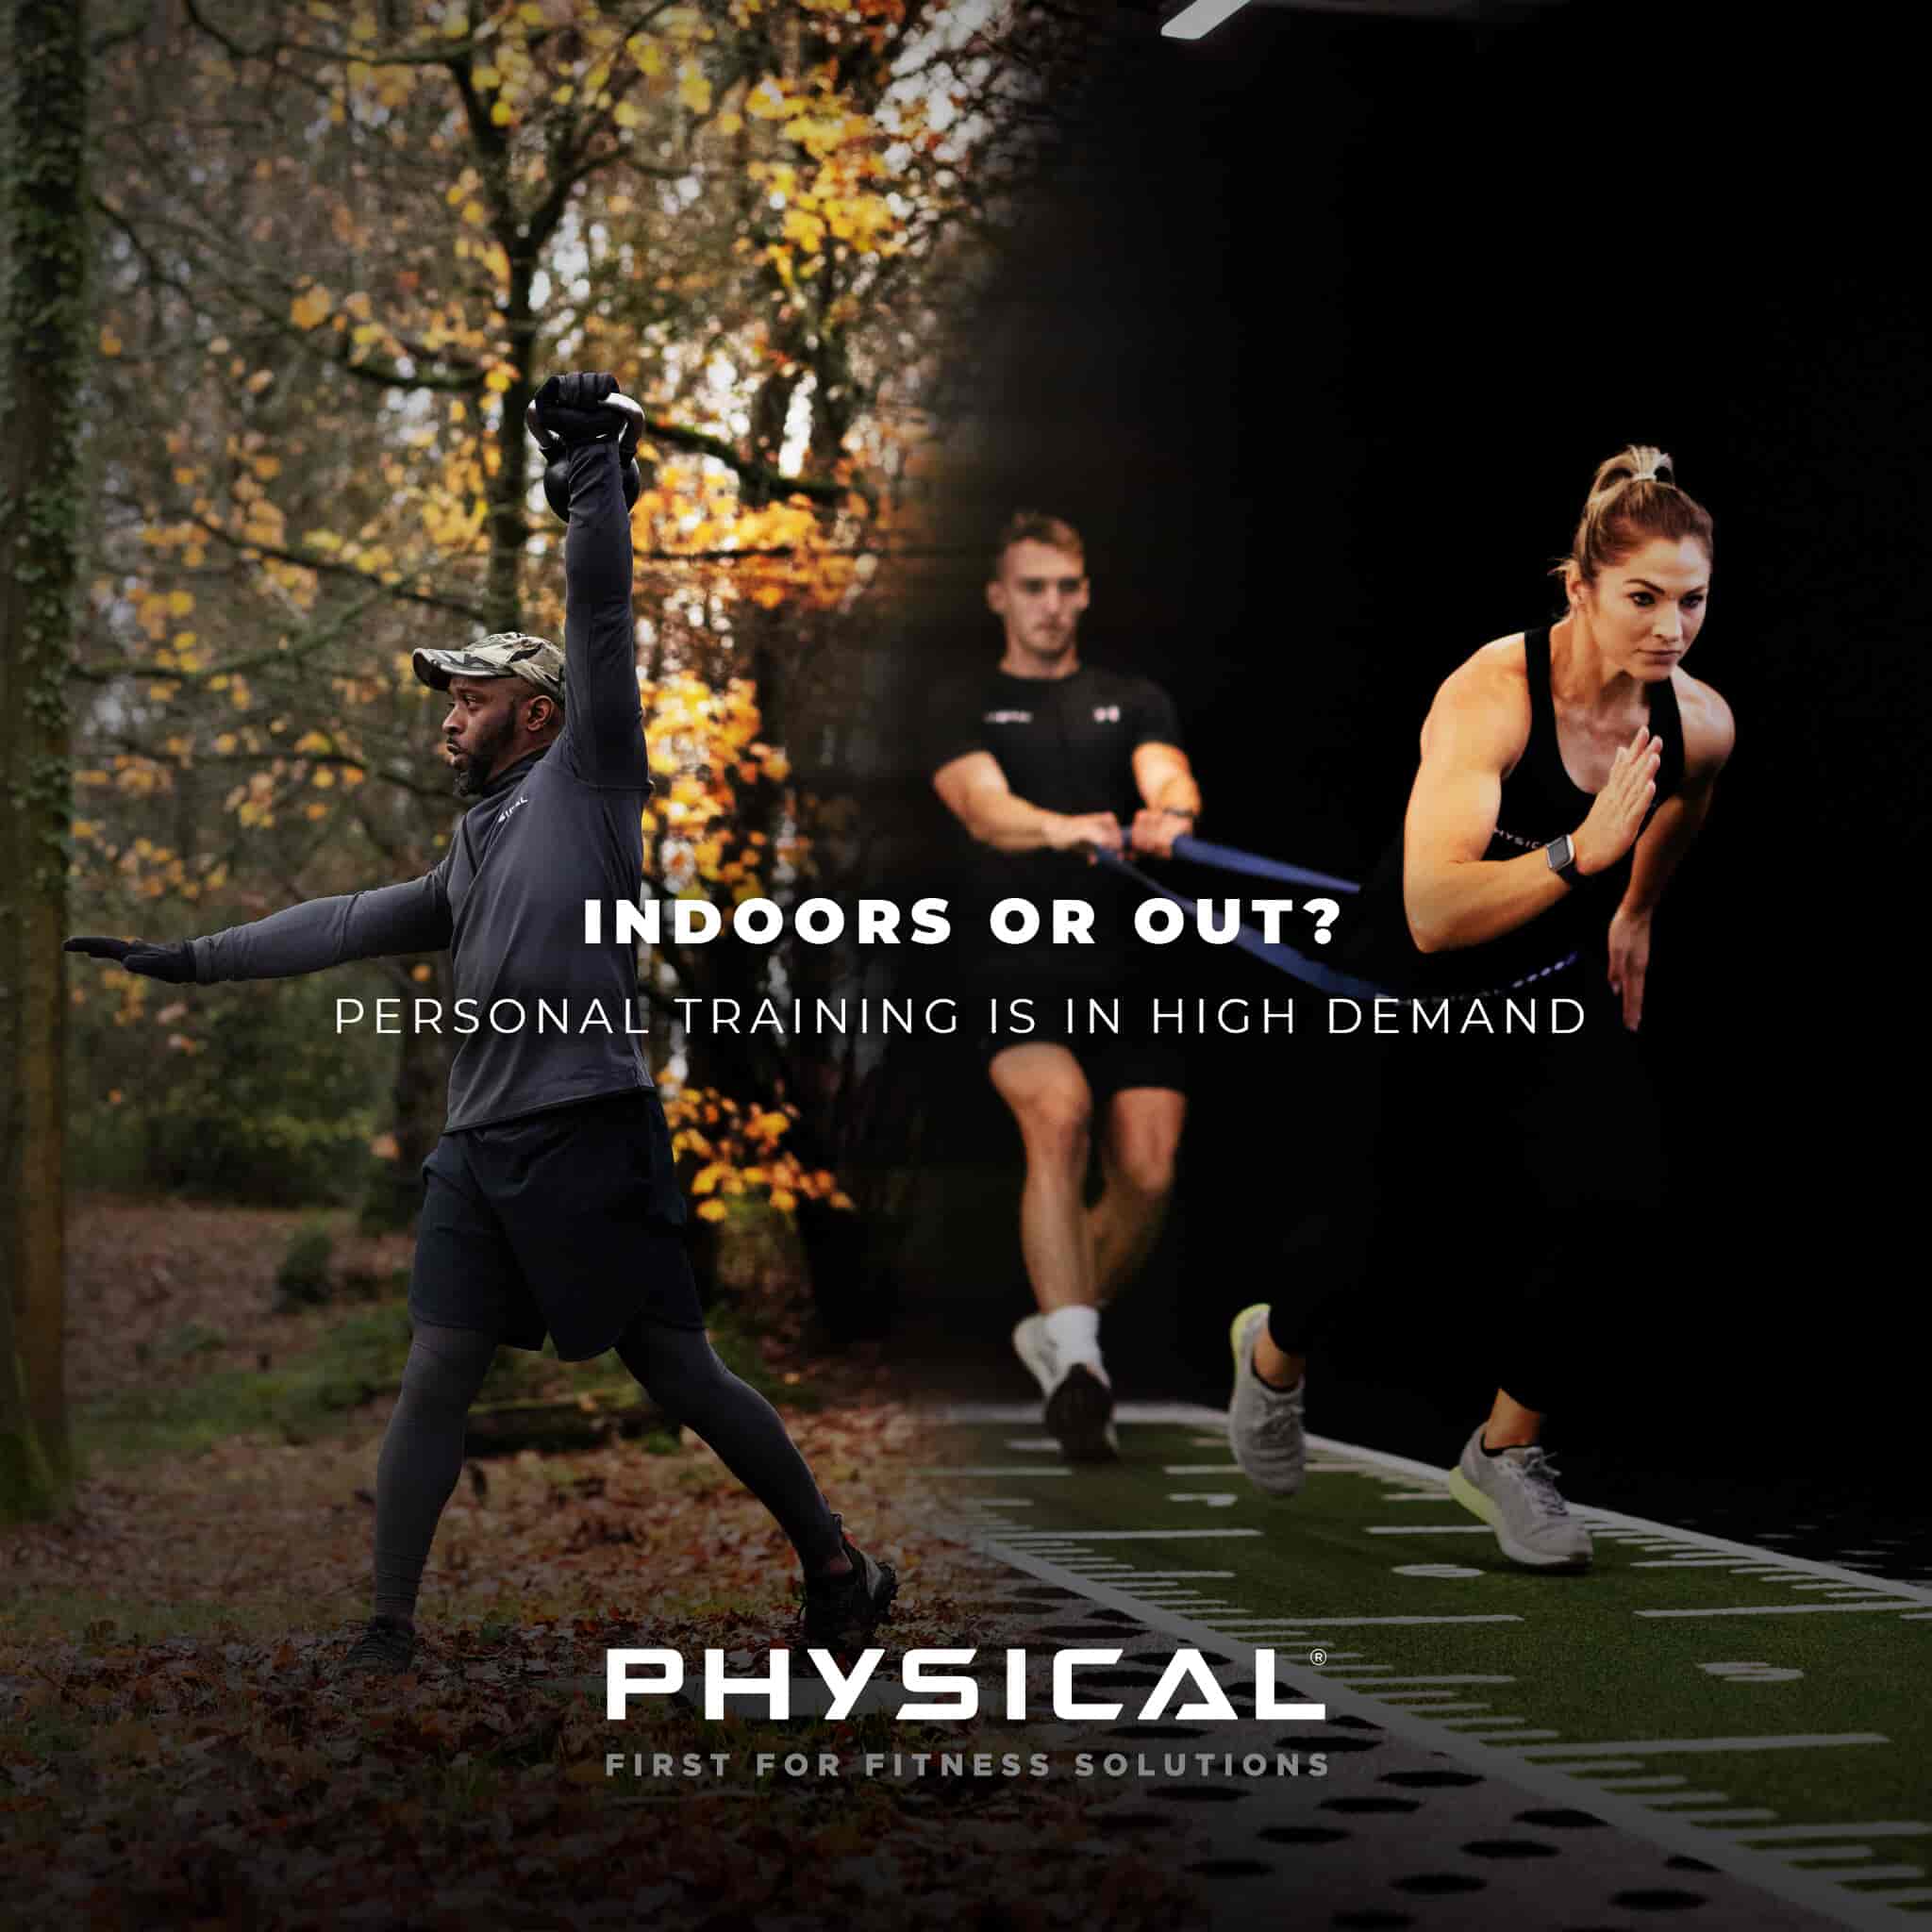 Indoors or out, personal training is in high demand. How will you keep your offering fresh?